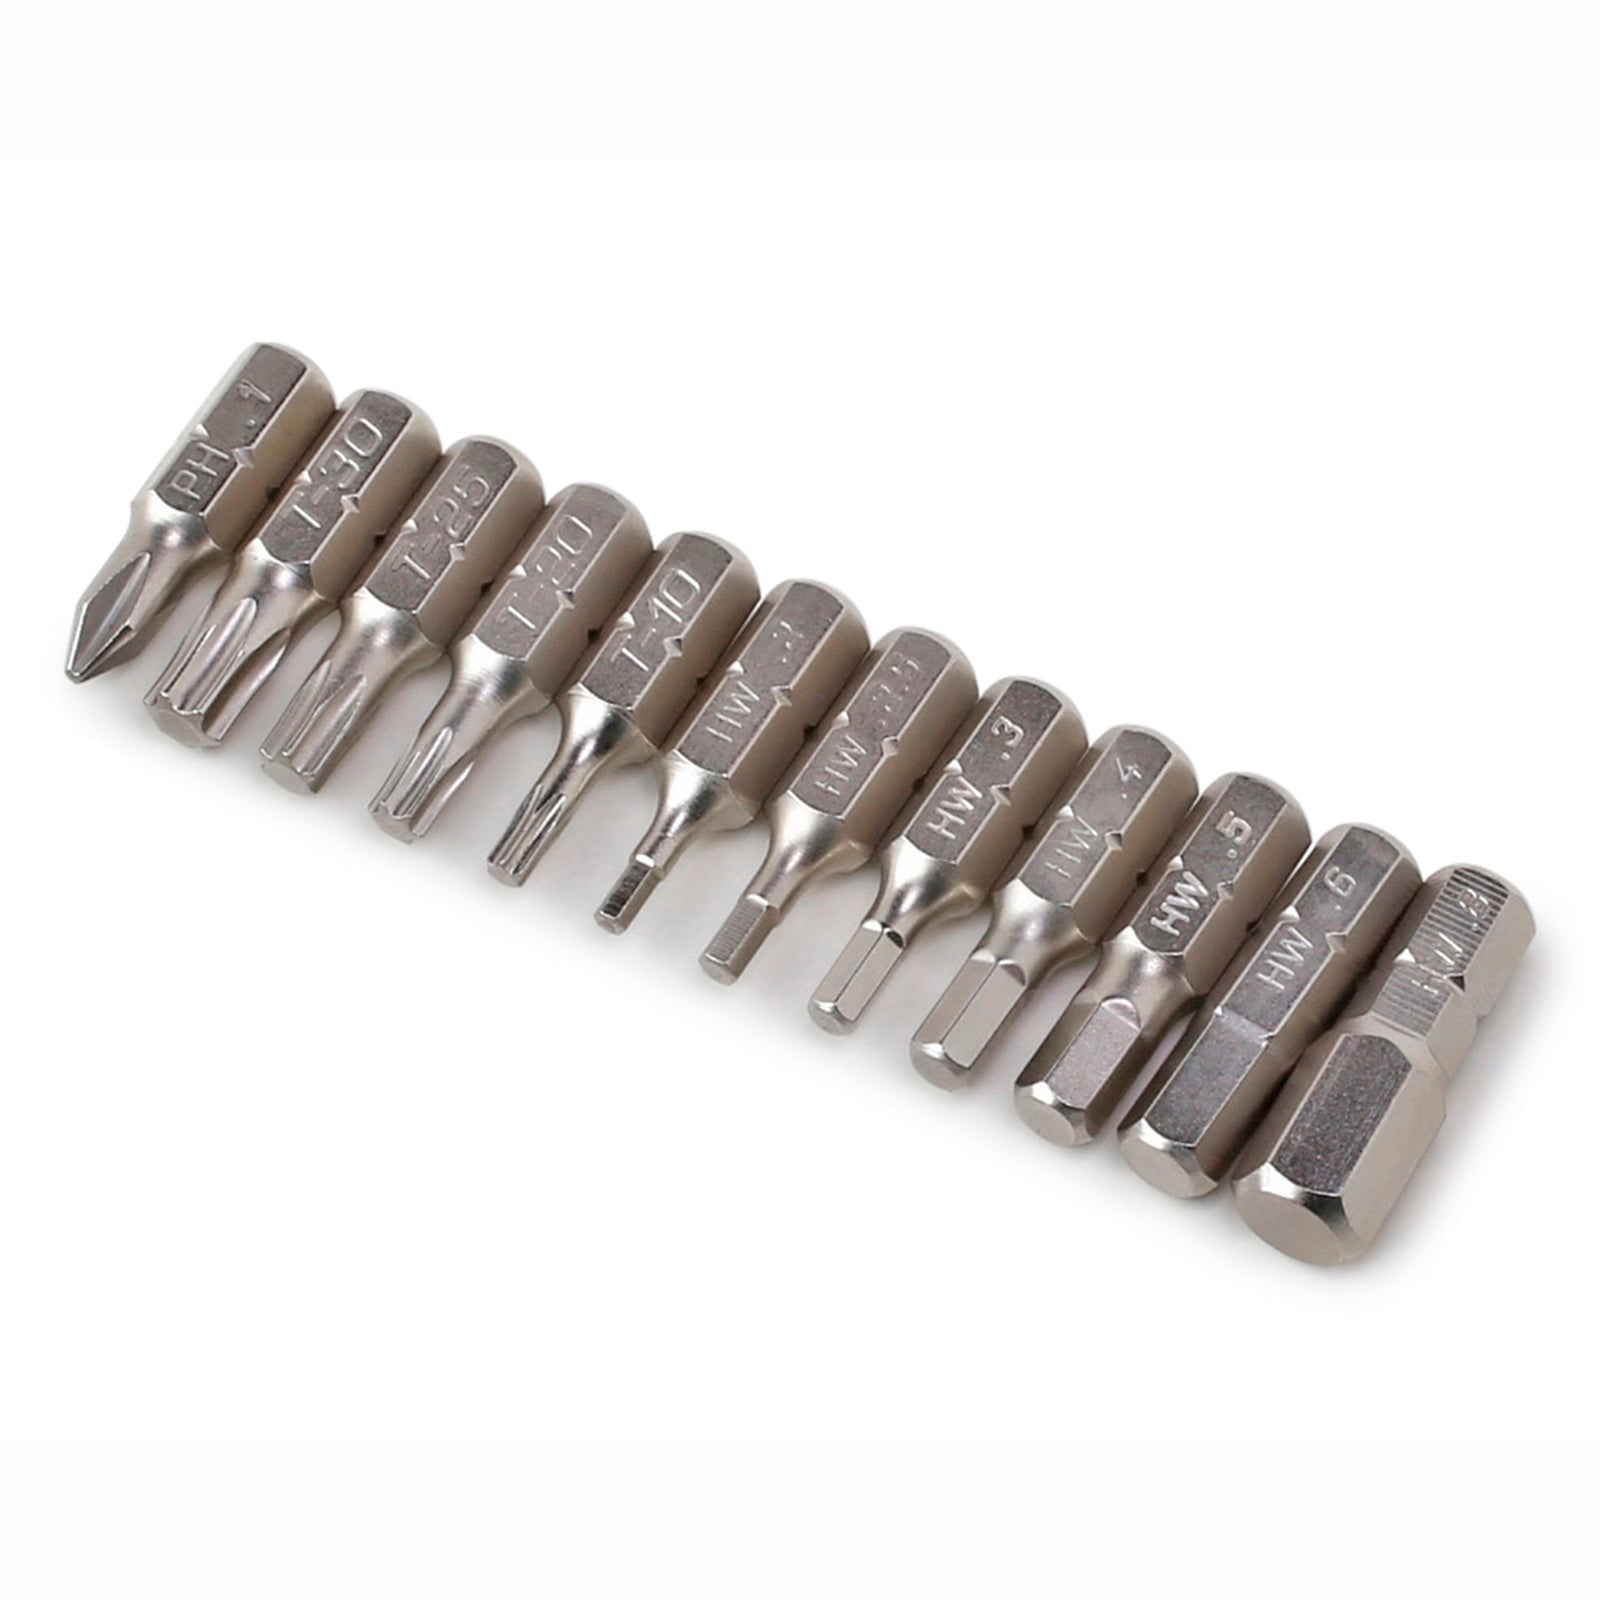 Prestacycle Pro 12 piece Replacement 1/4″ hex bits - RideCX cyclocross store